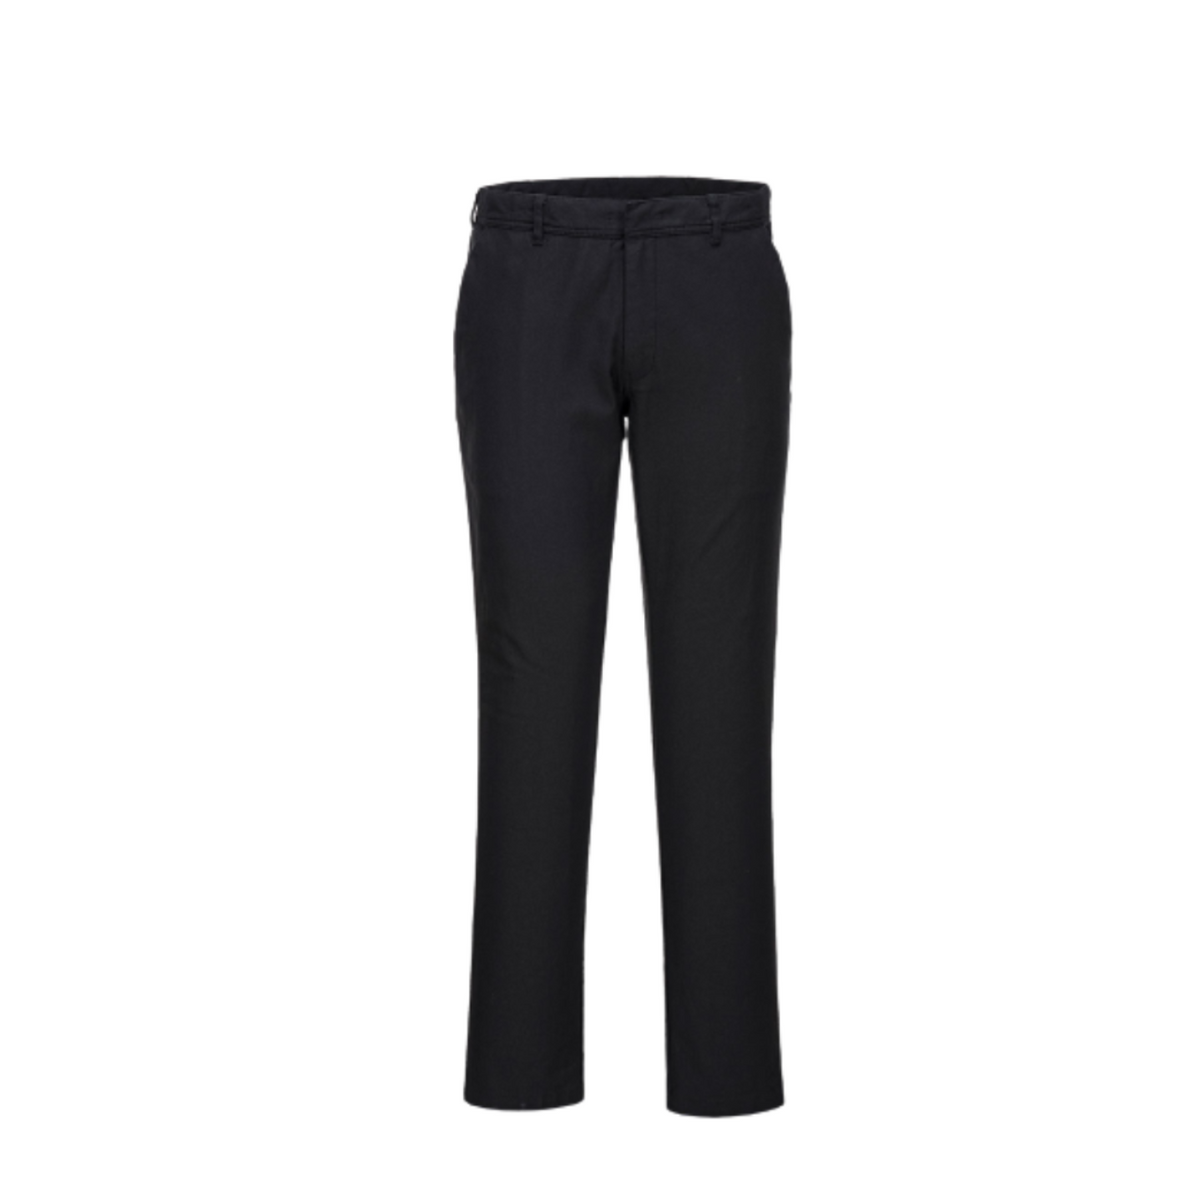 Portwest Stretch Slim Chino Pants Reflective Black Slim Fit Comfy Pant S232-Collins Clothing Co